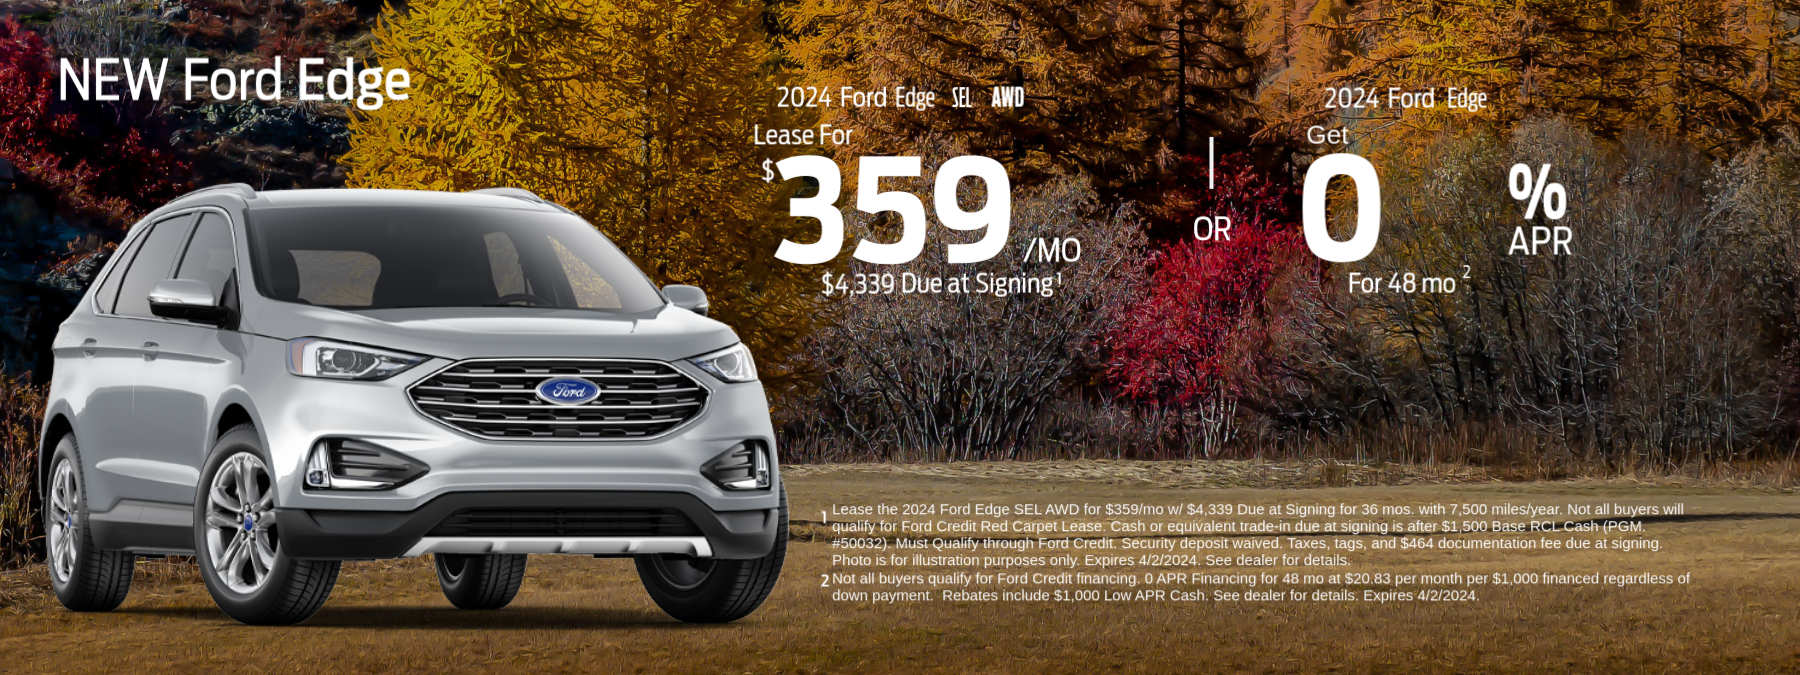 Don't Miss The New Ford Edge Special offers!